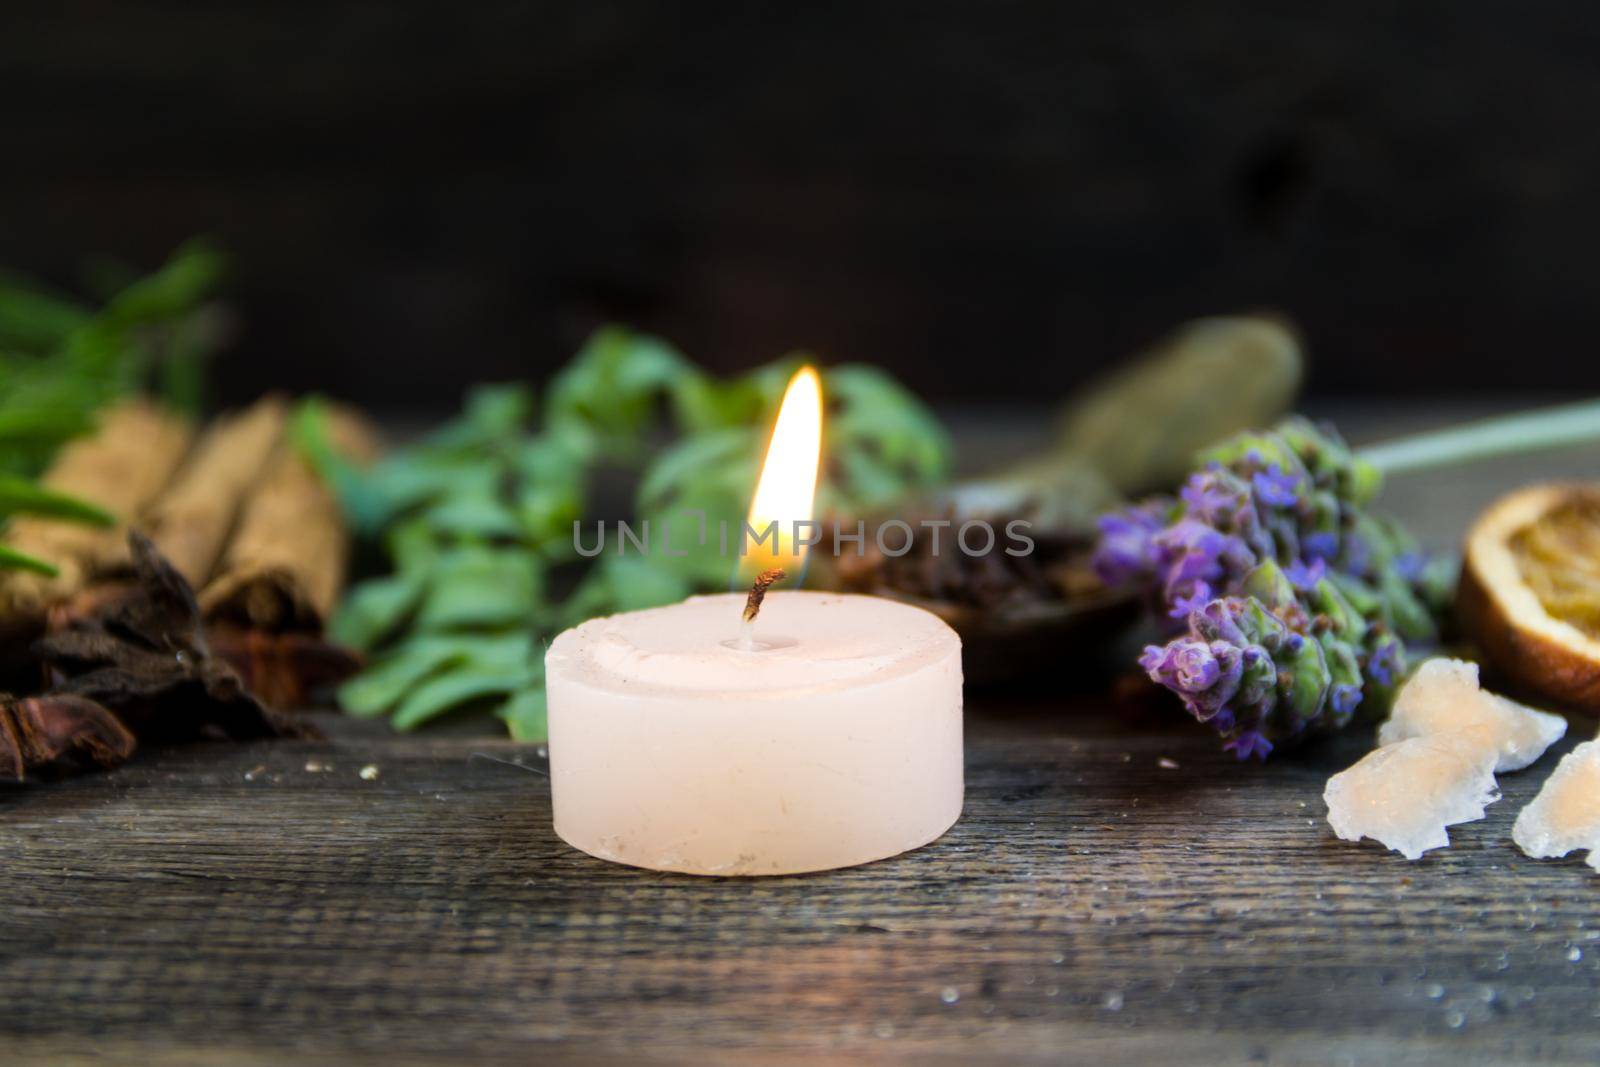 variety of flowers, herbs, candles and essences for aromatherapy, on rustic wood